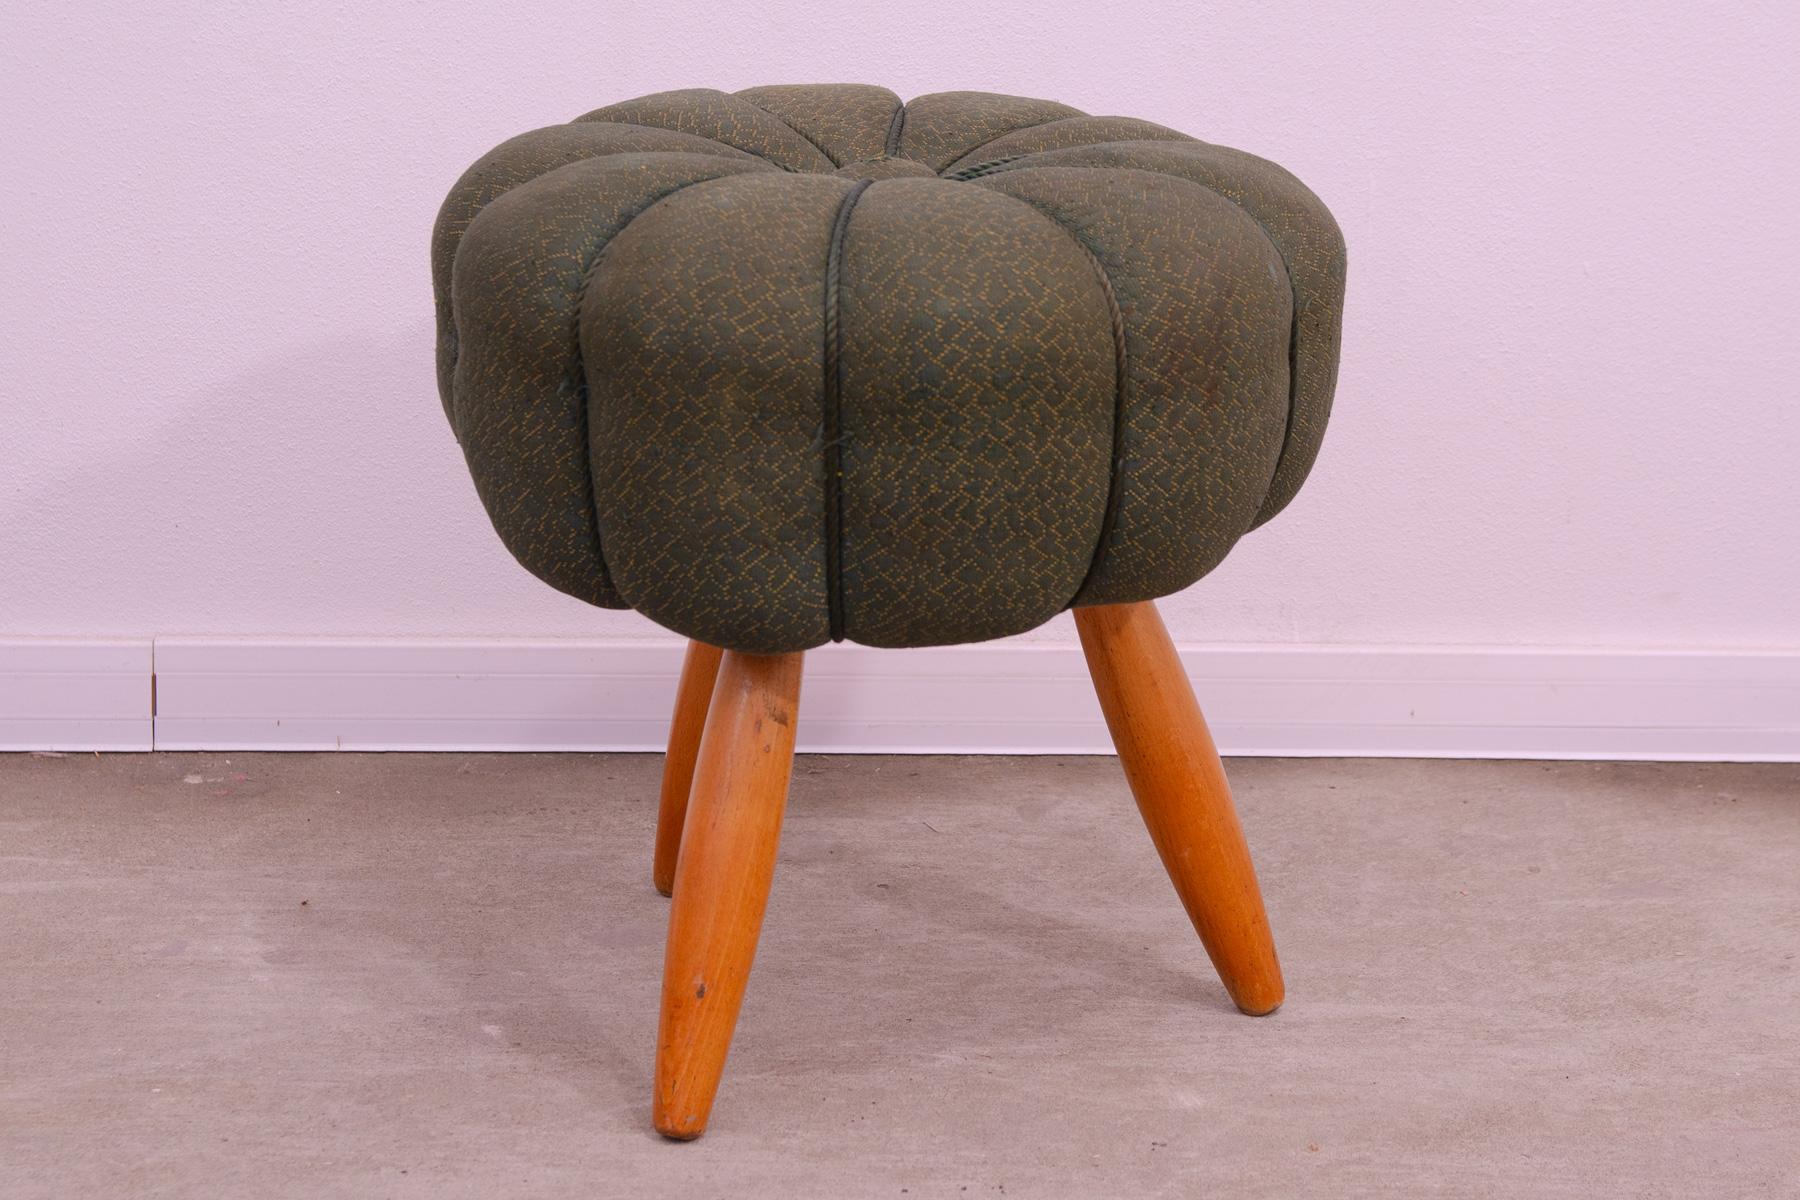 This midcentury strawbery shaped pouffe (footstool) was made in the 1940s in the former Czechoslovakia. It´s made of beech wood and fabric.
The pouffe is stable.
It is in its original condition, it shows signs of use and dirt – If you want to keep